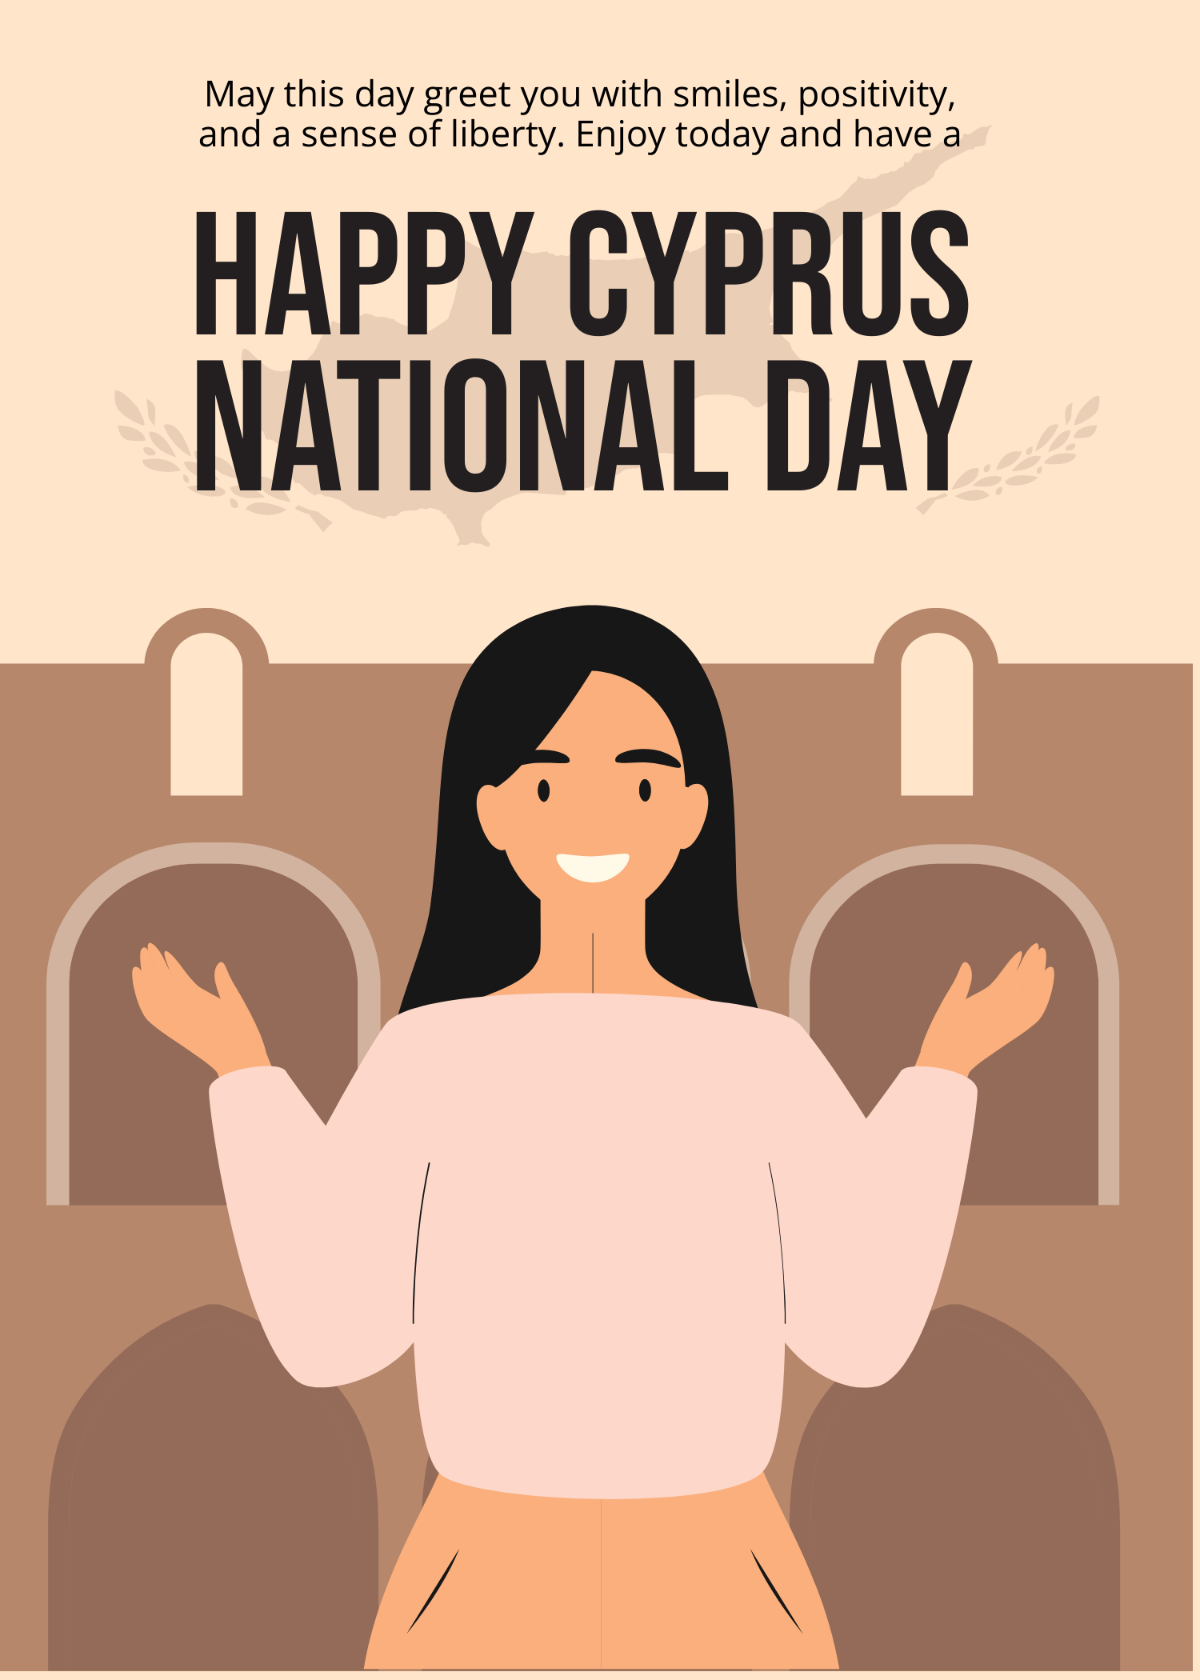 Cyprus National Day Greeting Card Template